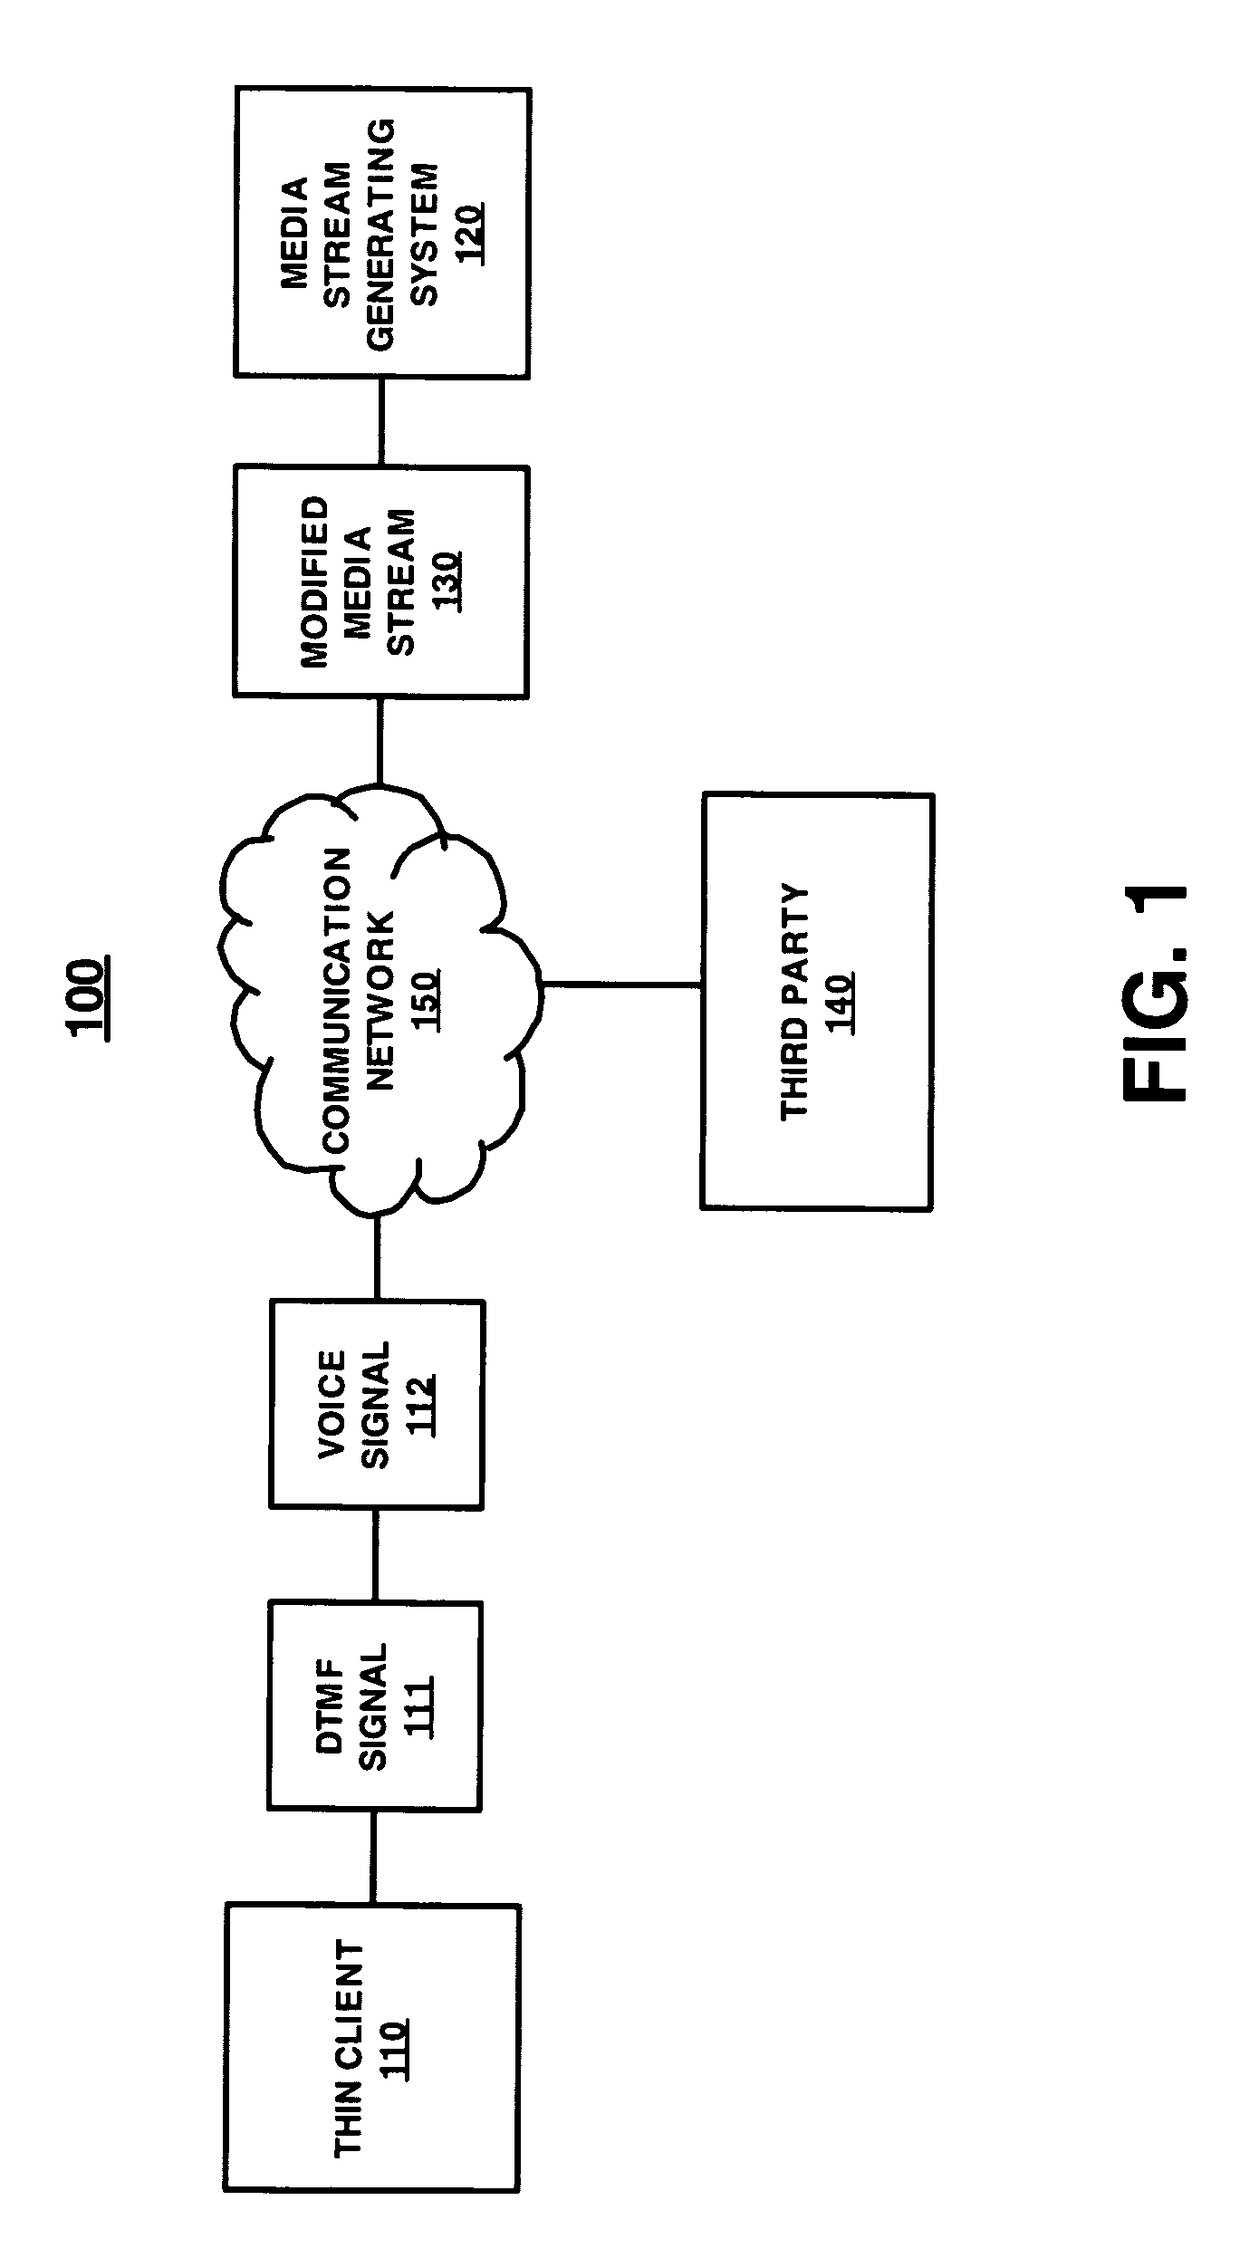 Method and system for improving interactive media response systems using visual cues